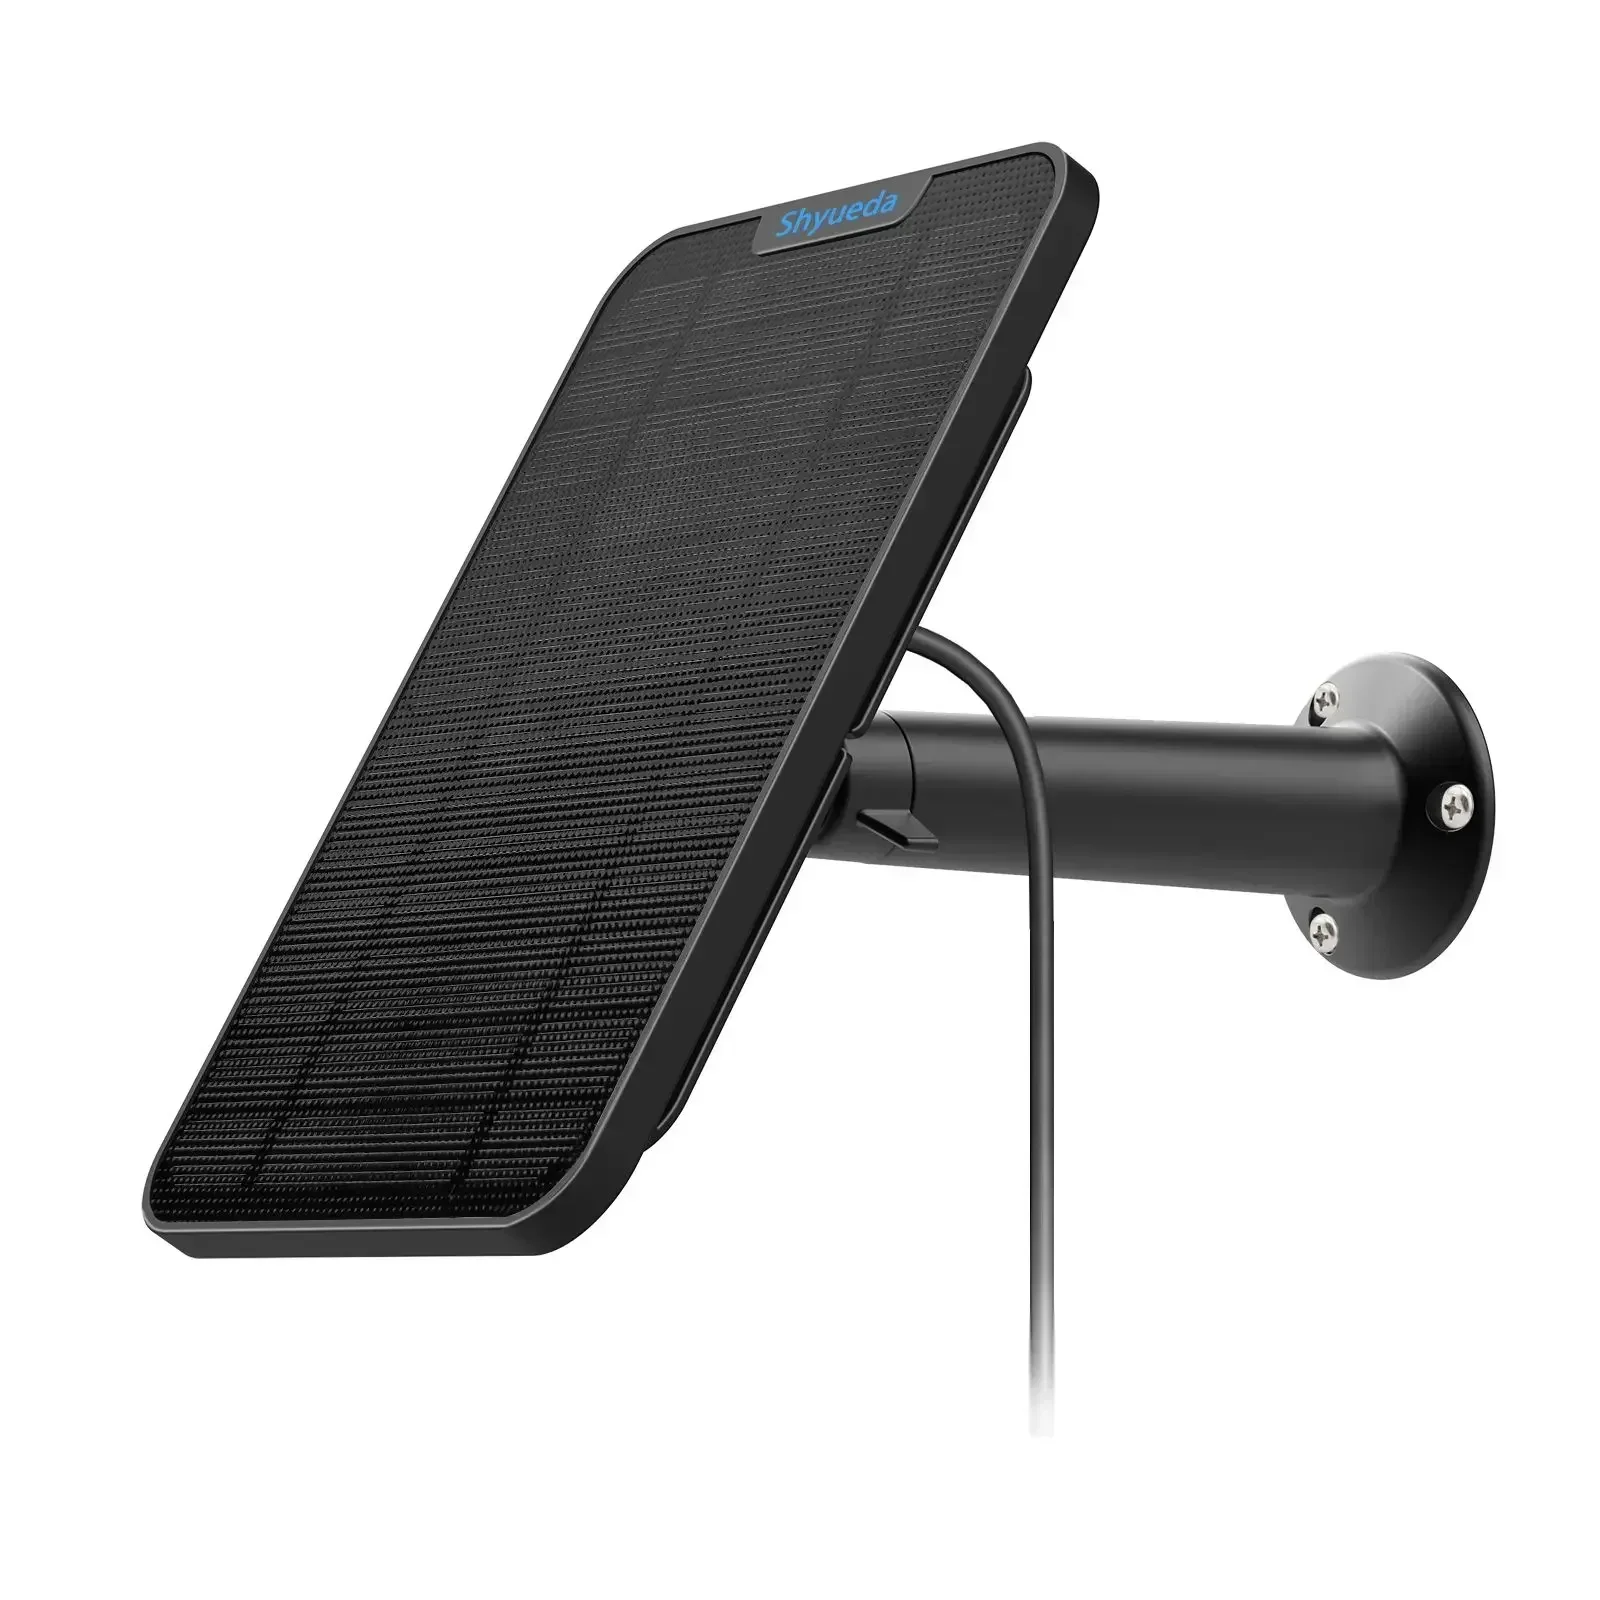 New 4W Solar Panel charging 3000mah Battery for Blink Outdoor